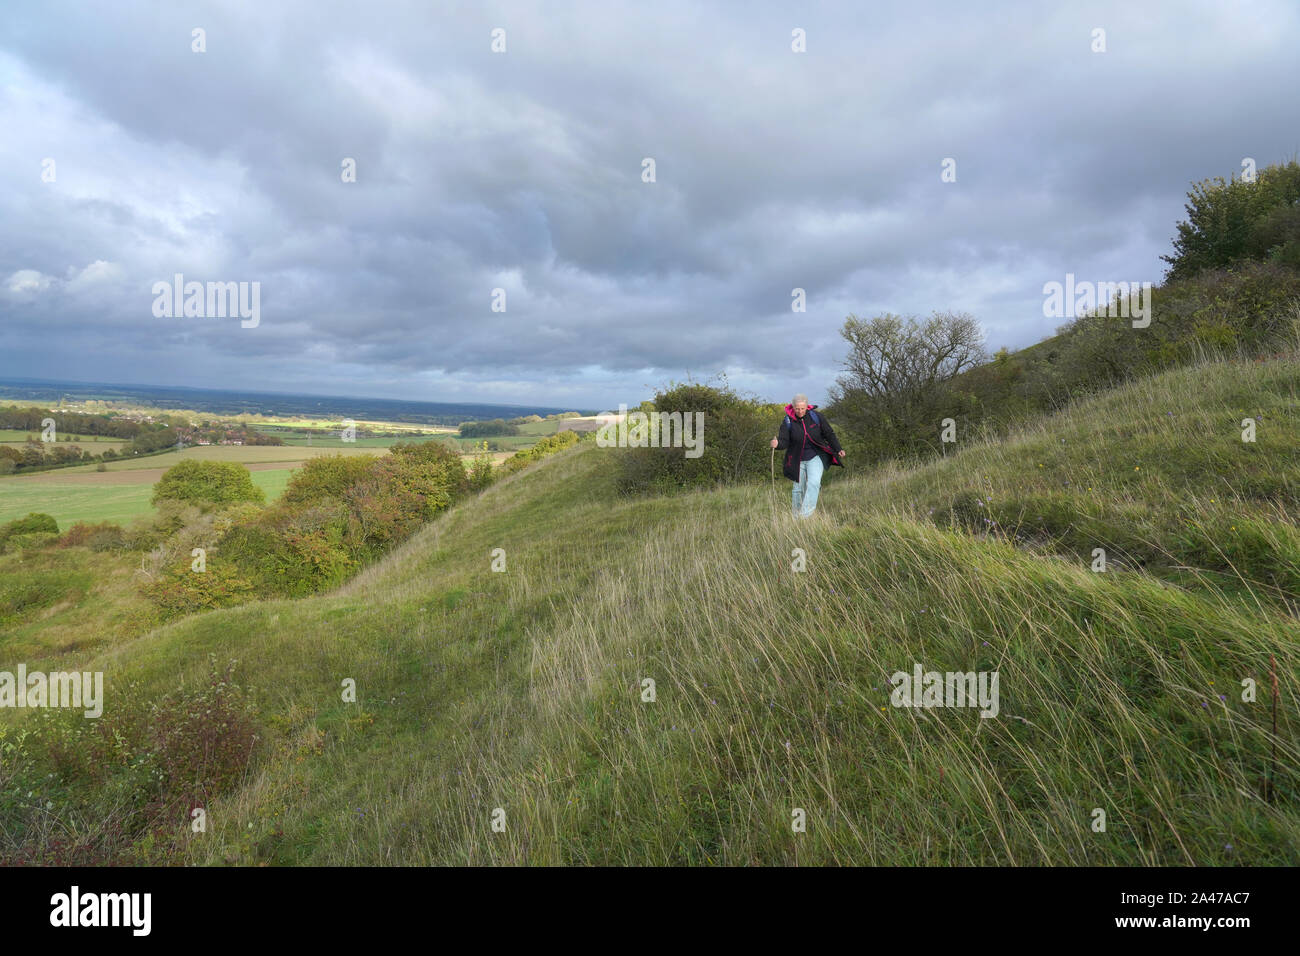 A woman walking in nature, Malling Down nature reserve near Lewes, East Sussex, England Stock Photo